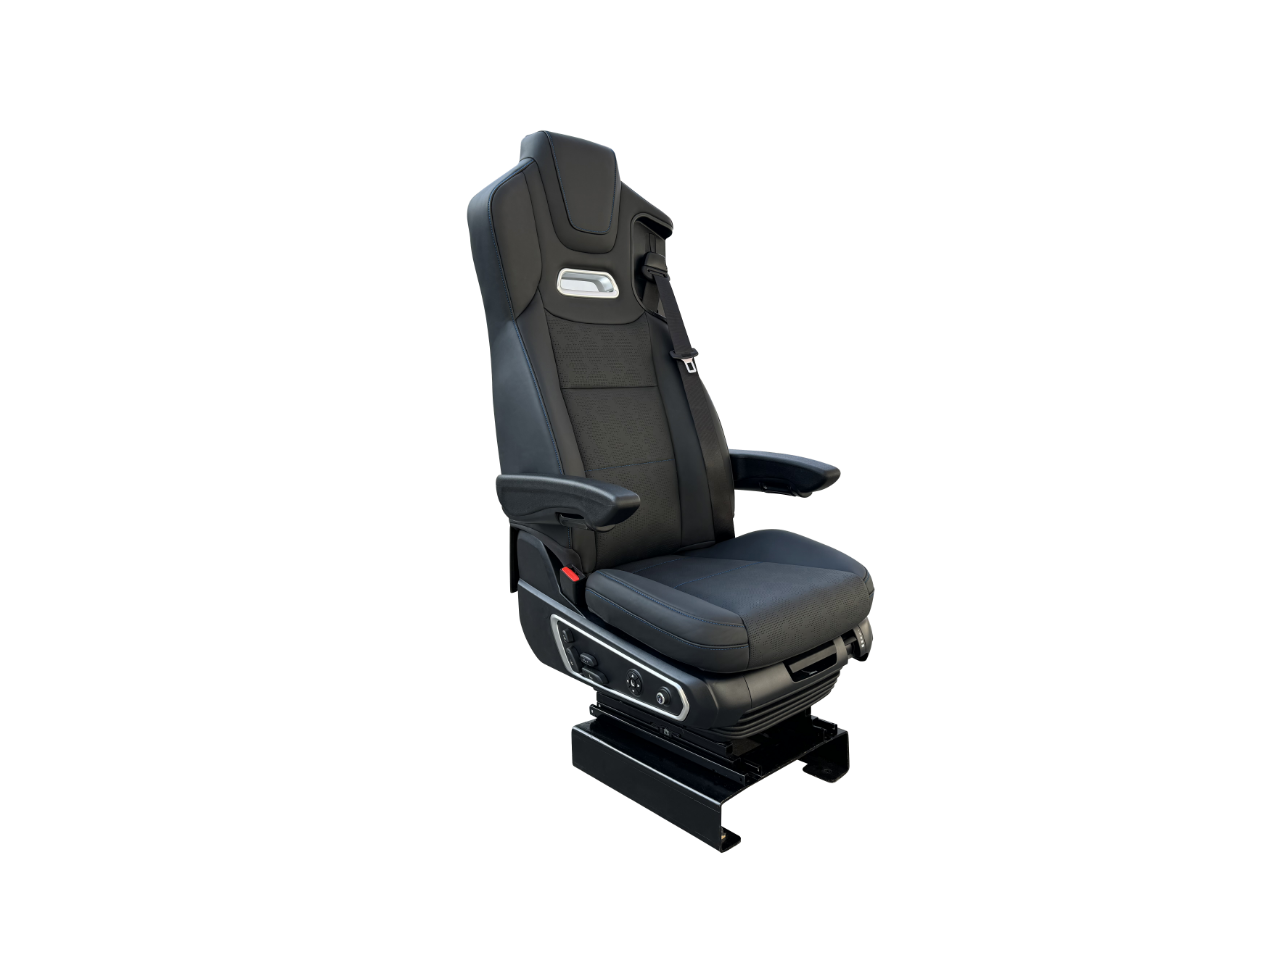 YTSE03A High-end Electric Full-air Suspended Driver Seat